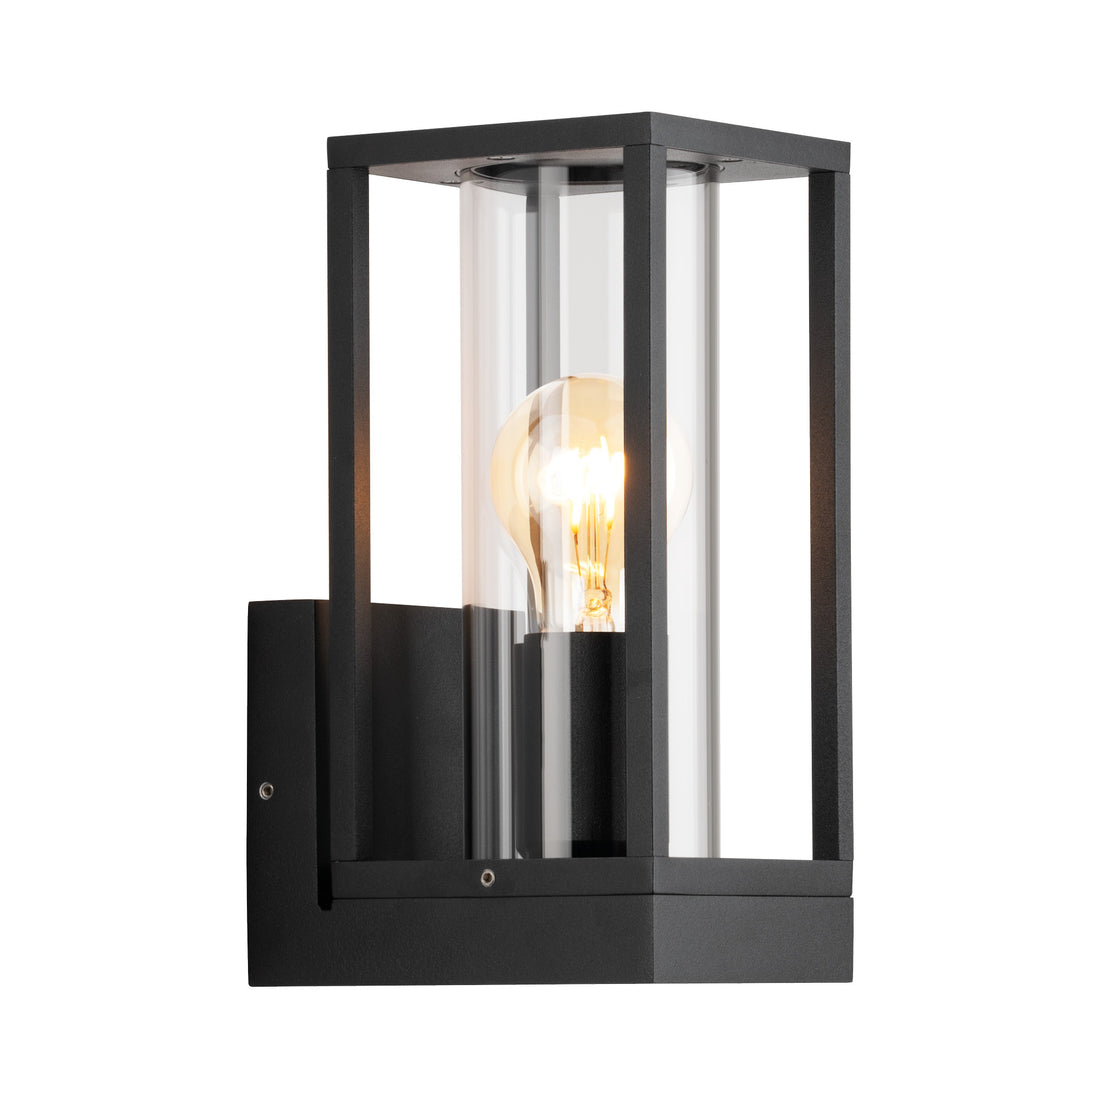 Eleanor Black Box with Glass Exterior Wall Light